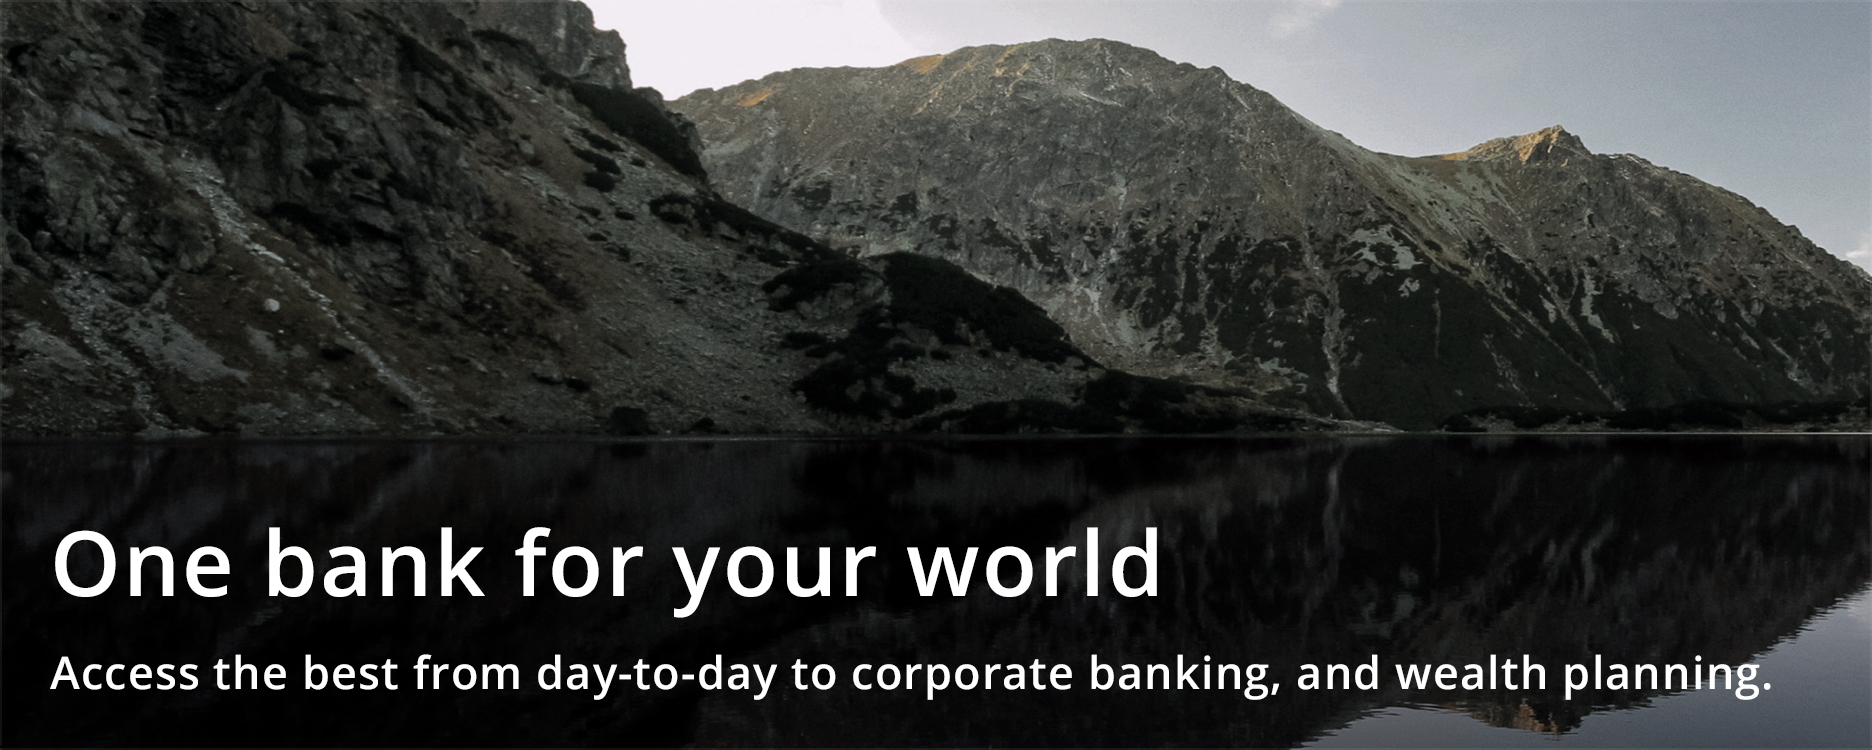 One bank for your world